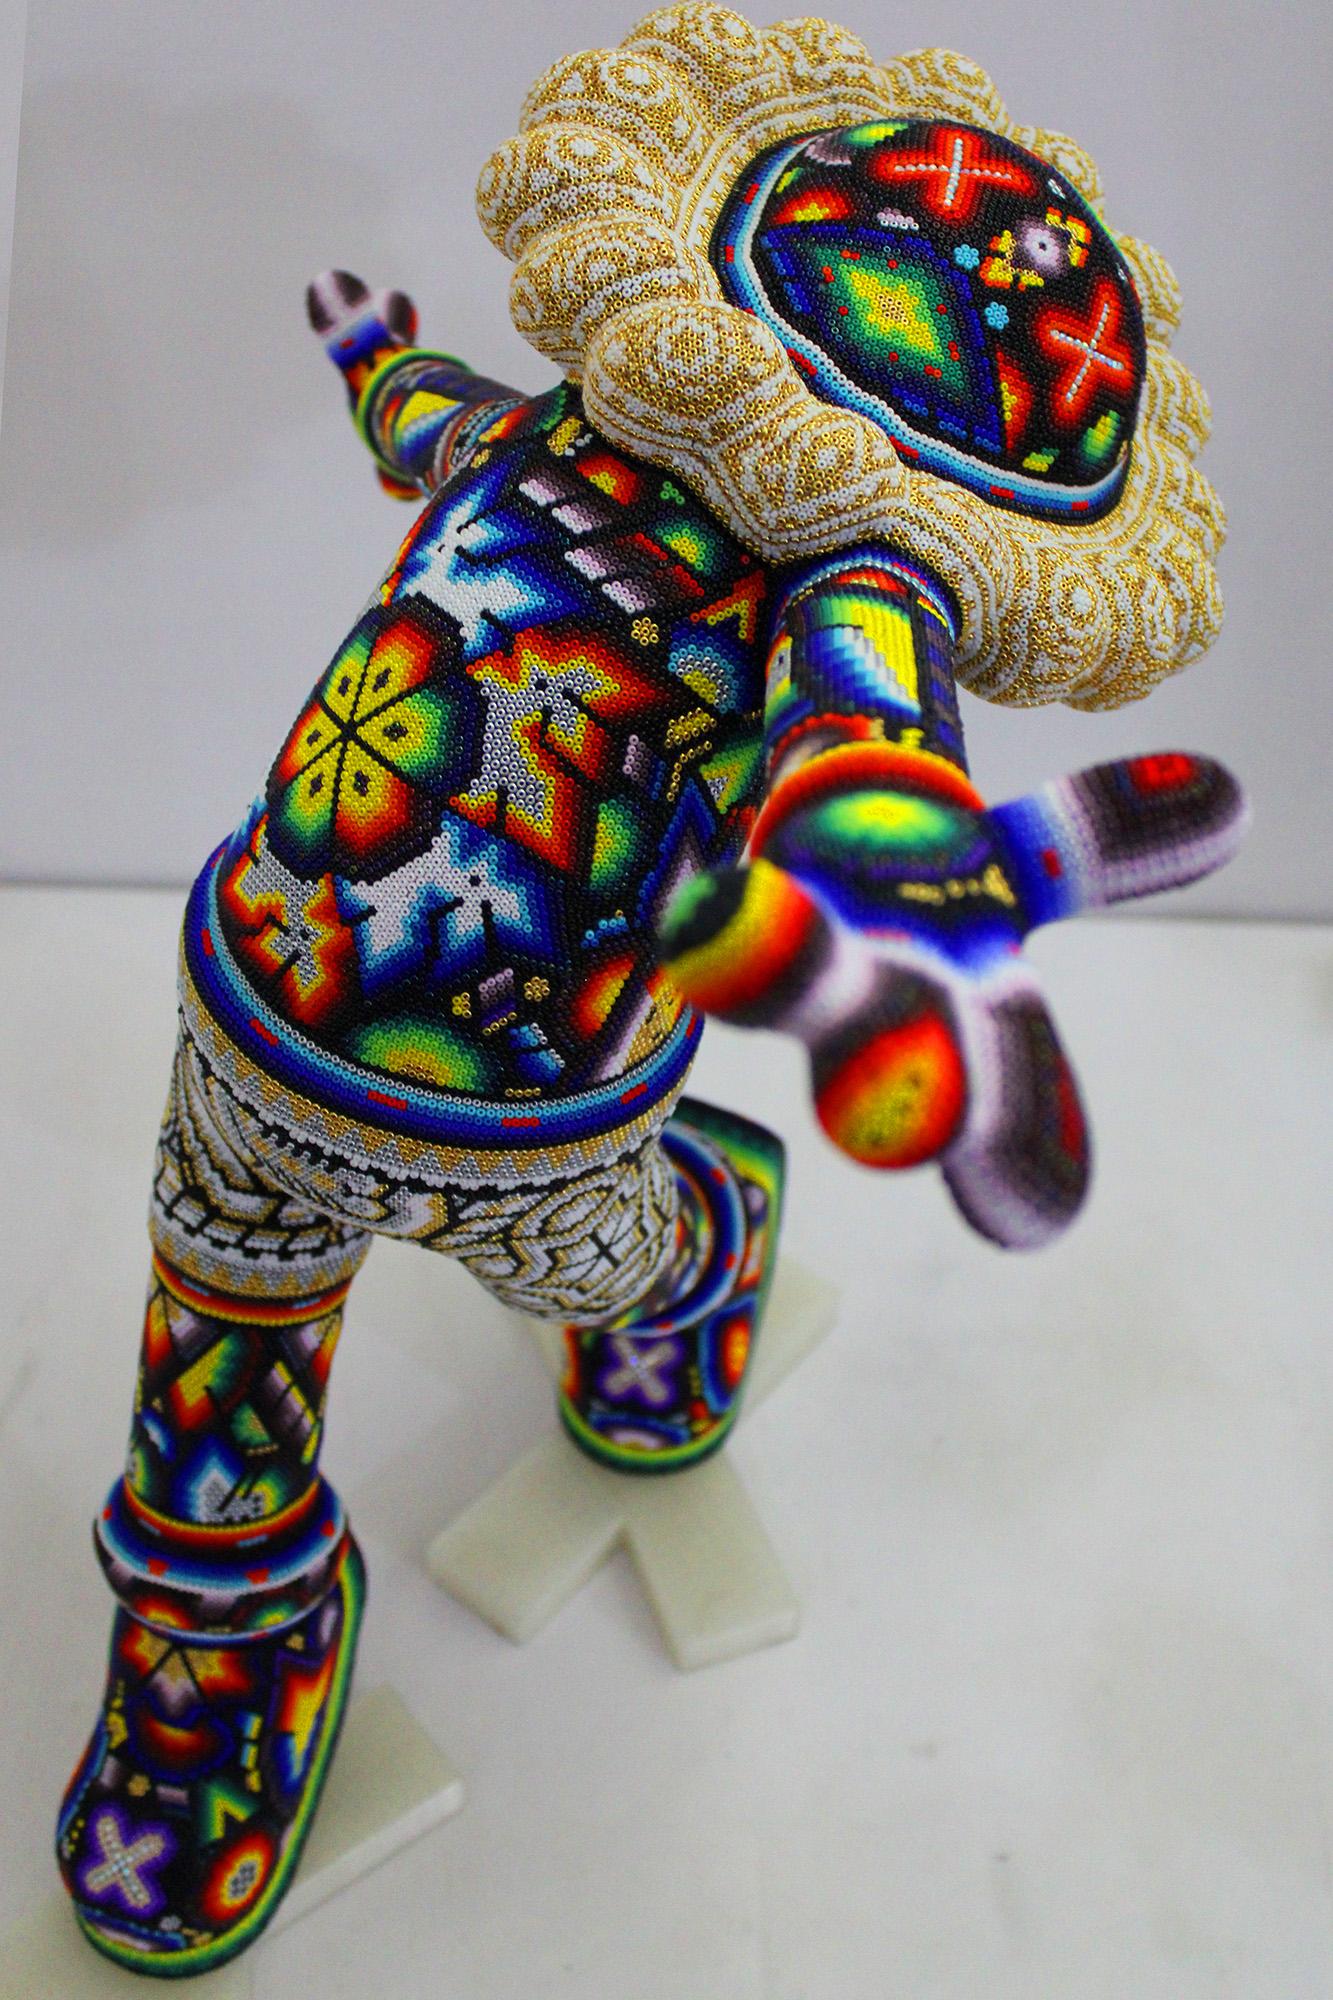 CHROMA aka Rick Wolfryd  Figurative Sculpture - " Looking back " from Huichol Series 